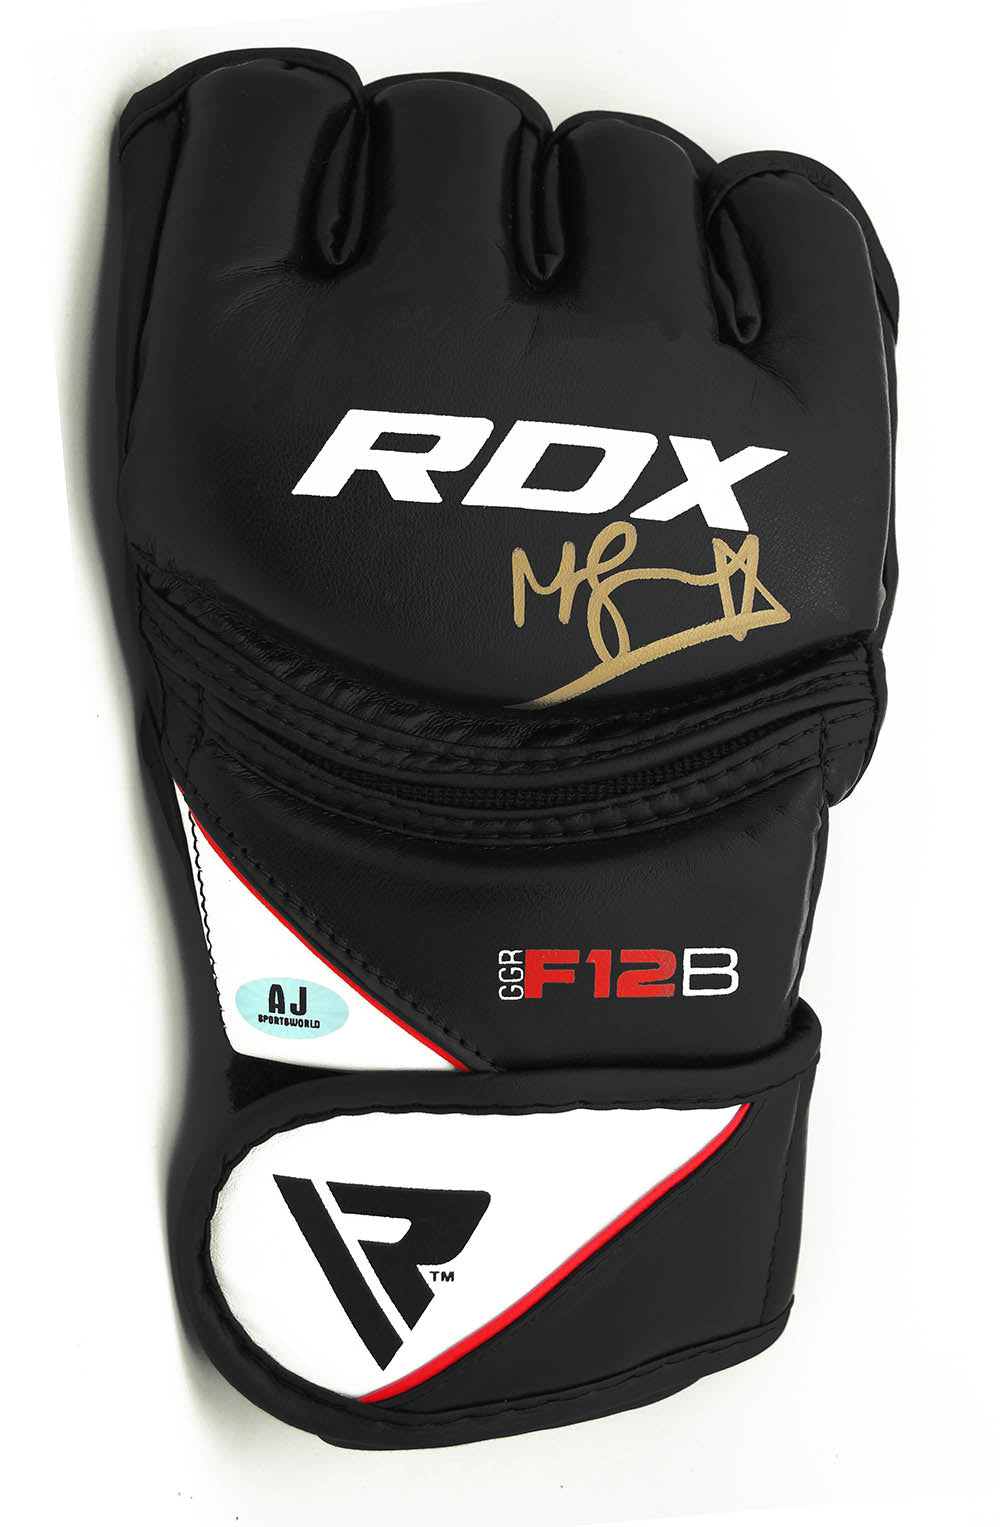 Michael Bisping UFC Autographed RDX Training Model MMA Glove